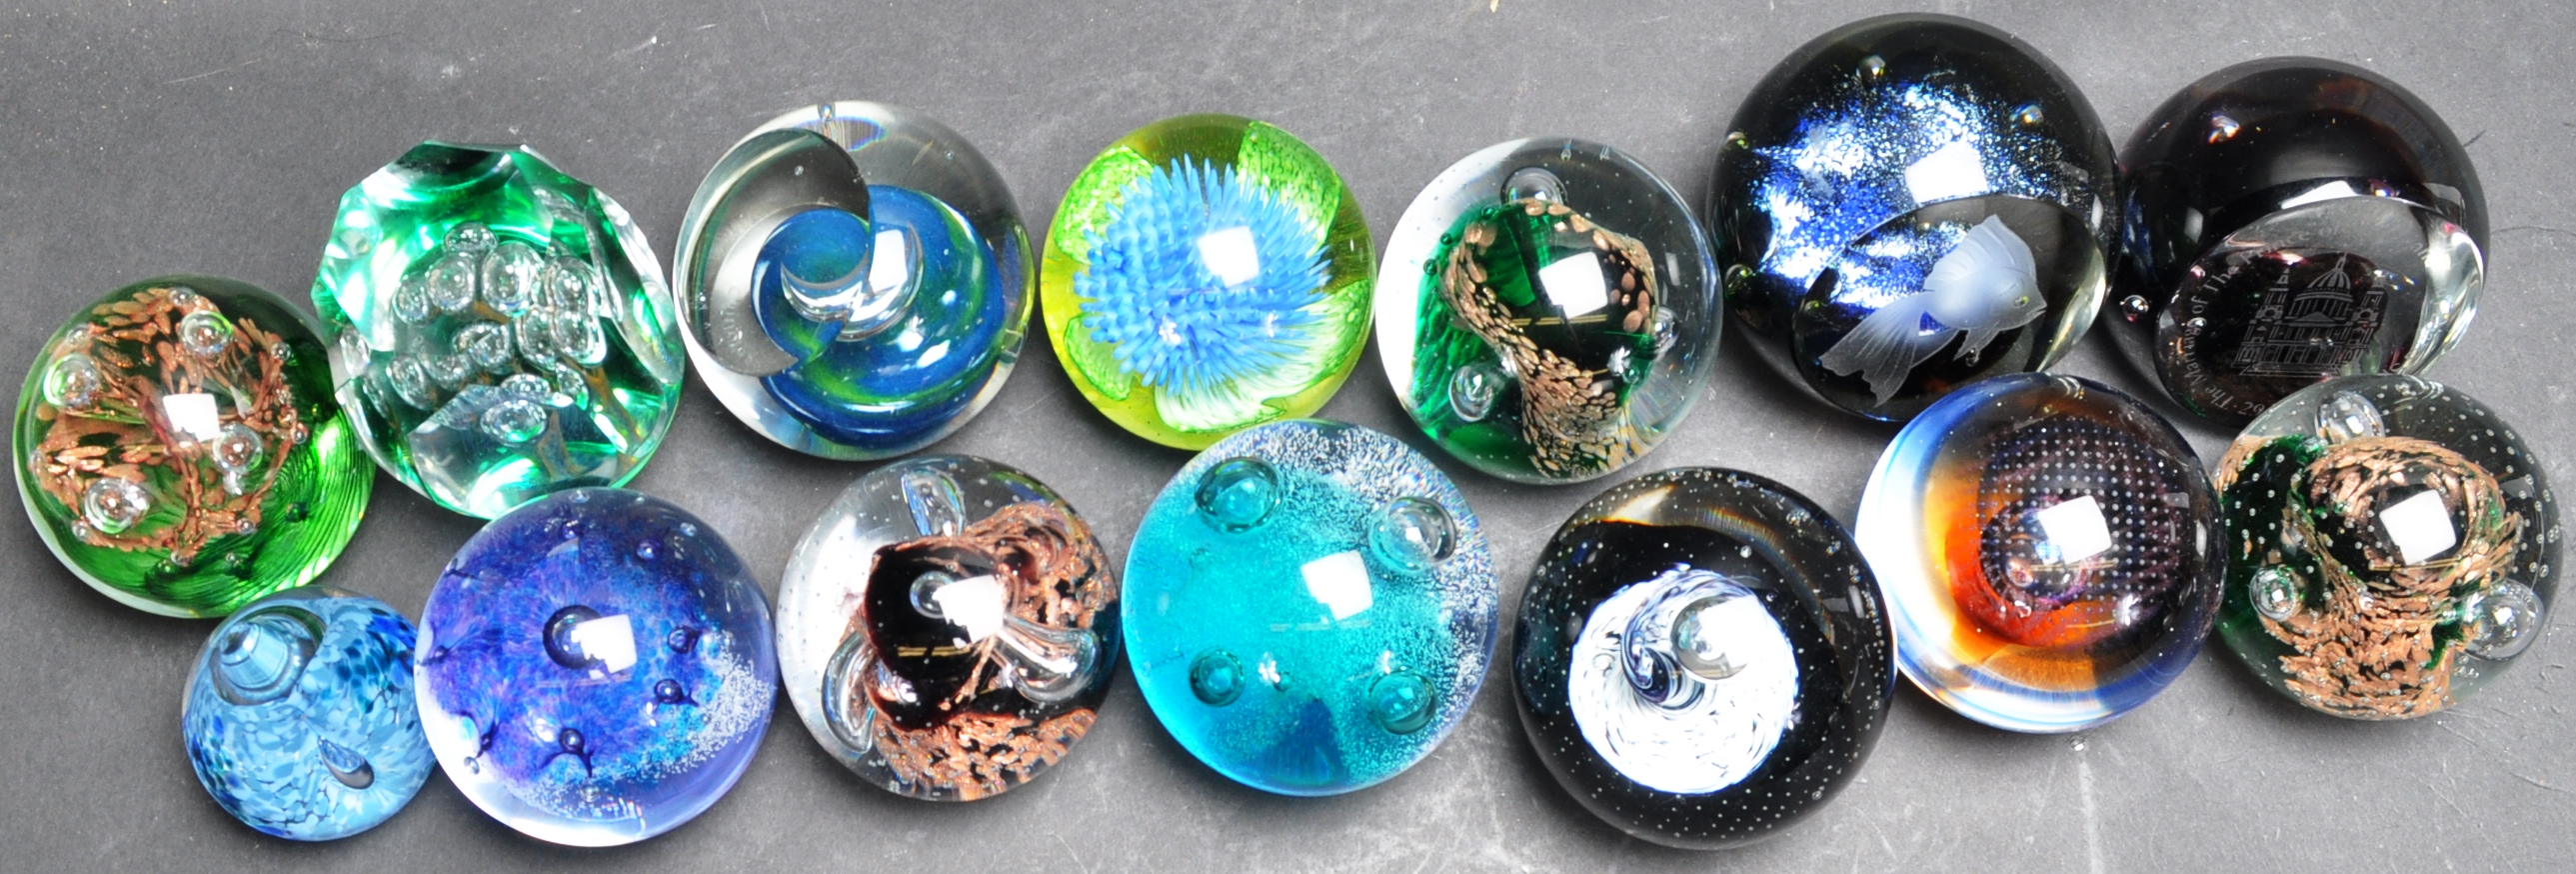 COLLECTION OF 20TH CENTURY CAITHNESS PAPERWEIGHTS. - Image 2 of 6